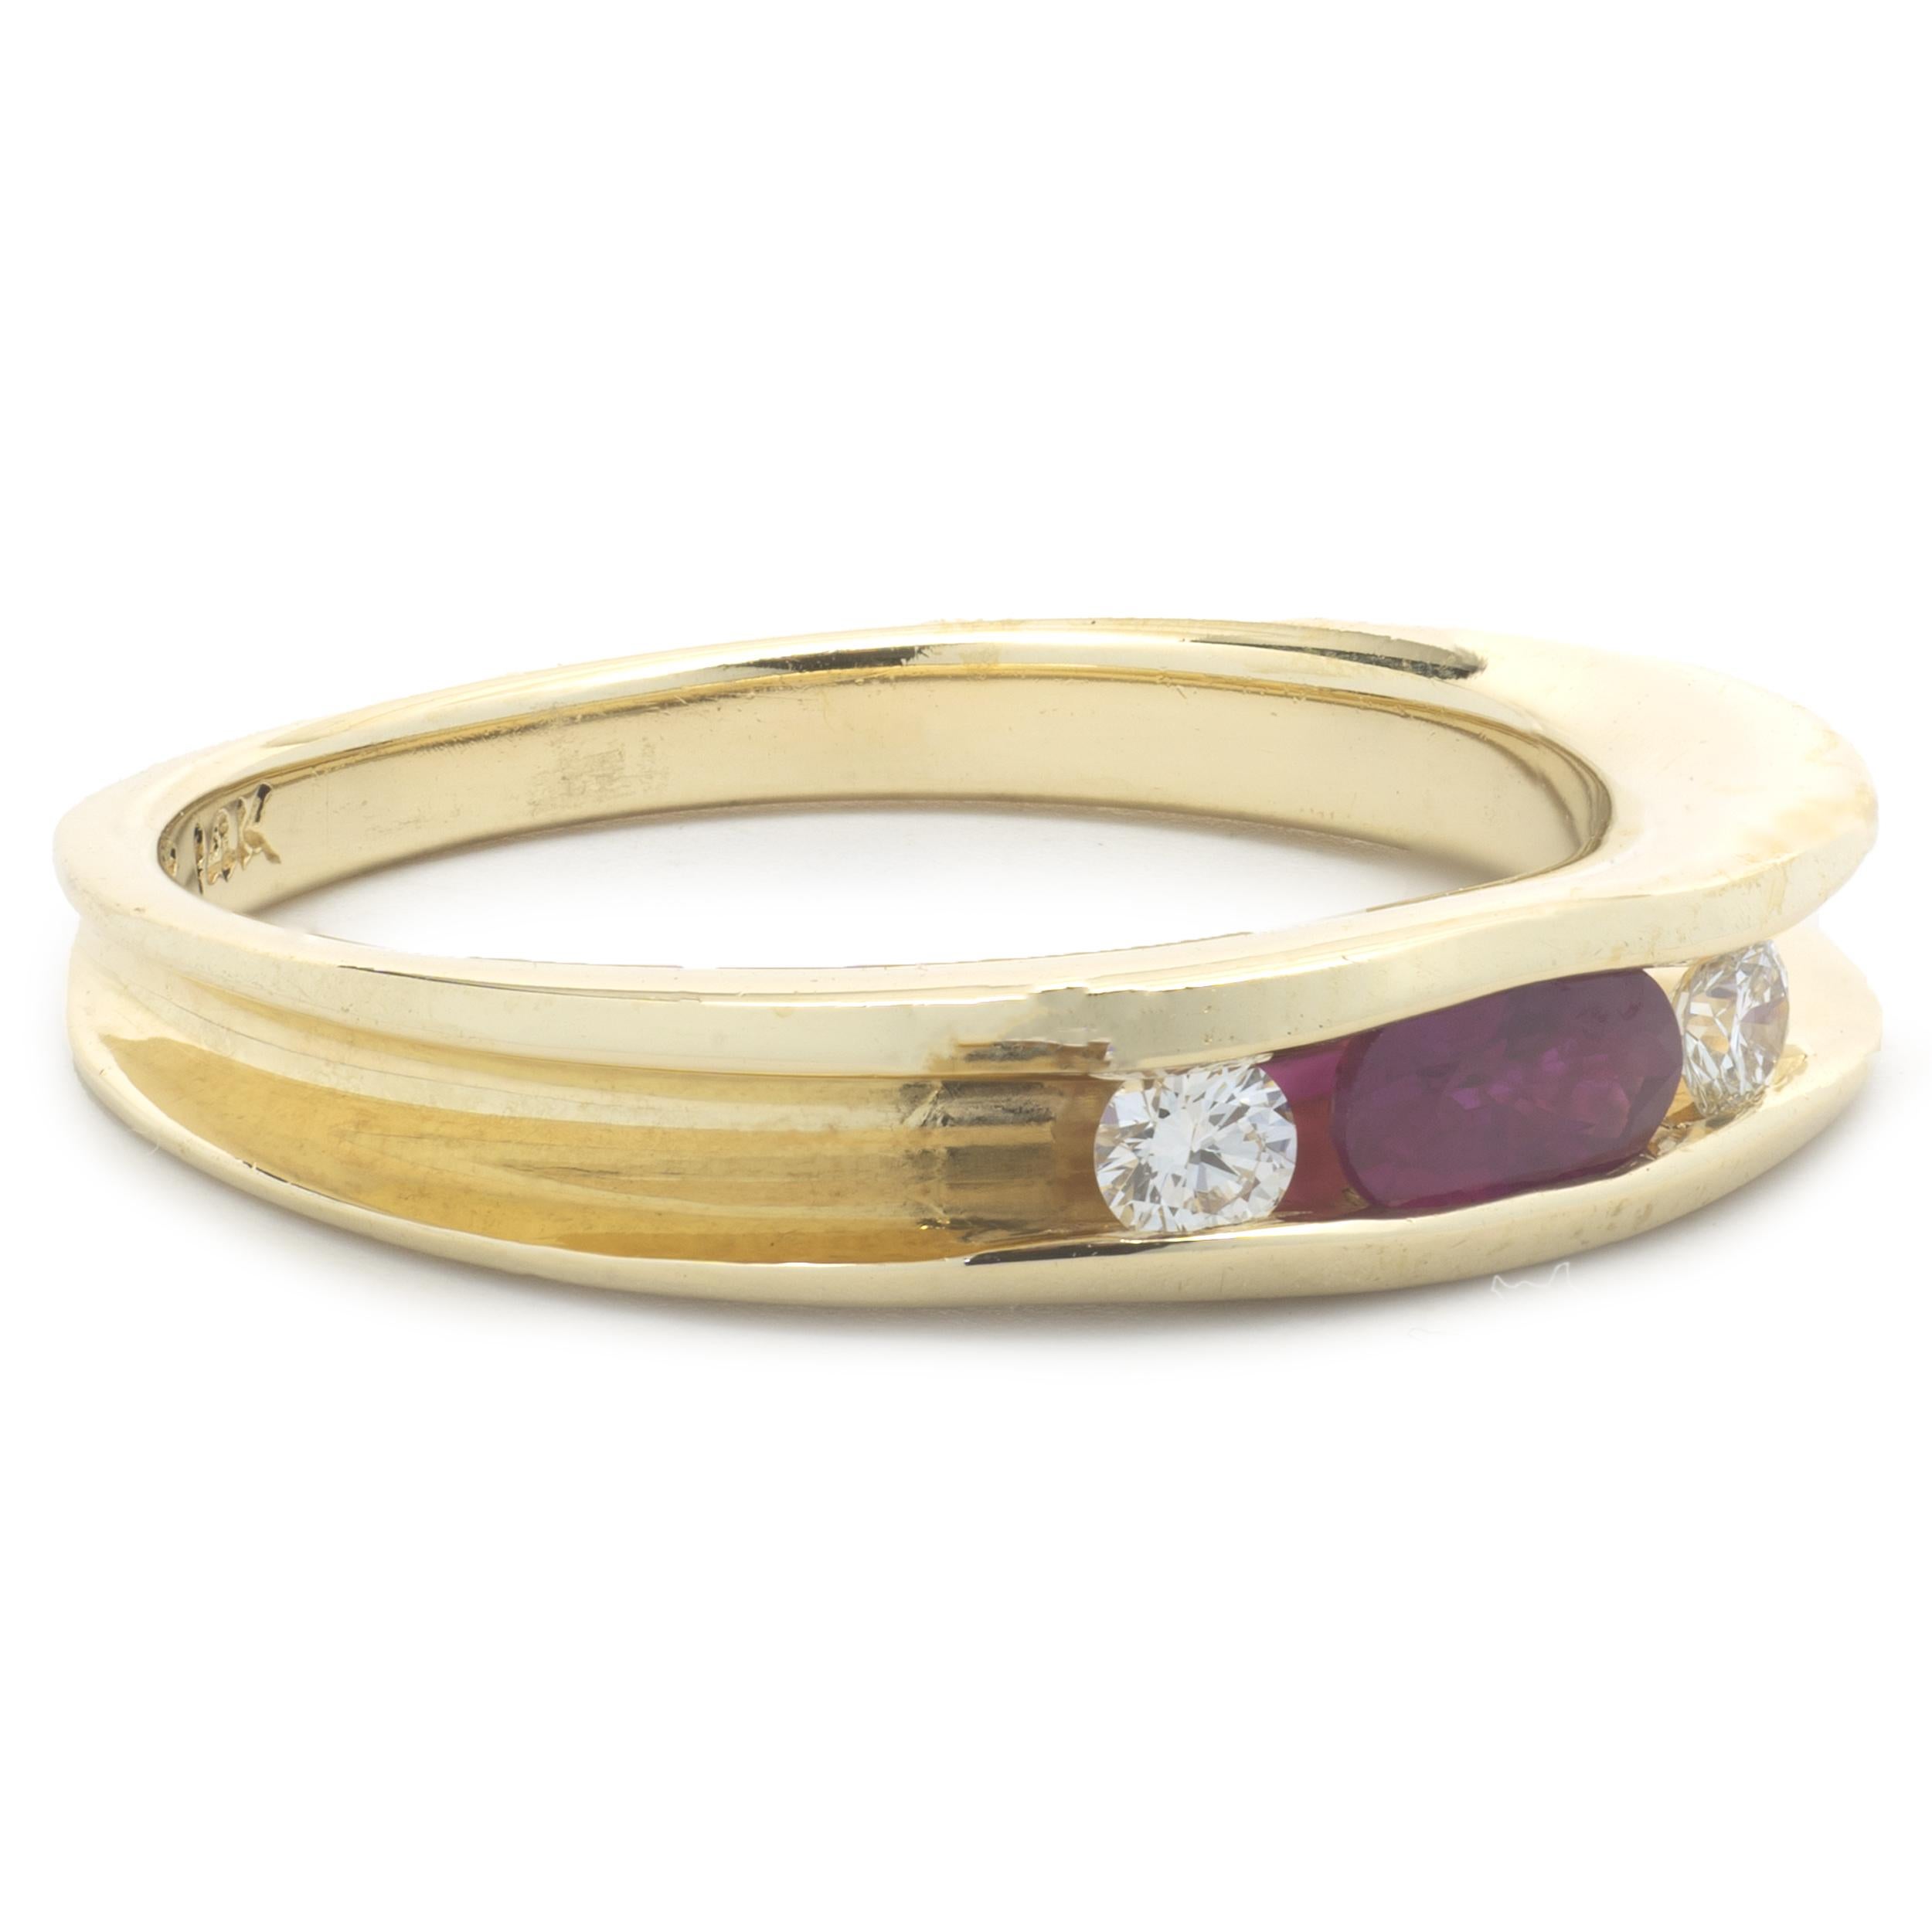 Material: 14K yellow gold
Diamonds: 2 round brilliant cut = .06cttw
Color: G
Clarity: SI1
Ruby: 1 oval cut = .20ct
Ring Size: 7 (allow up to two additional business days for sizing requests)
Weight: 3.50 grams
